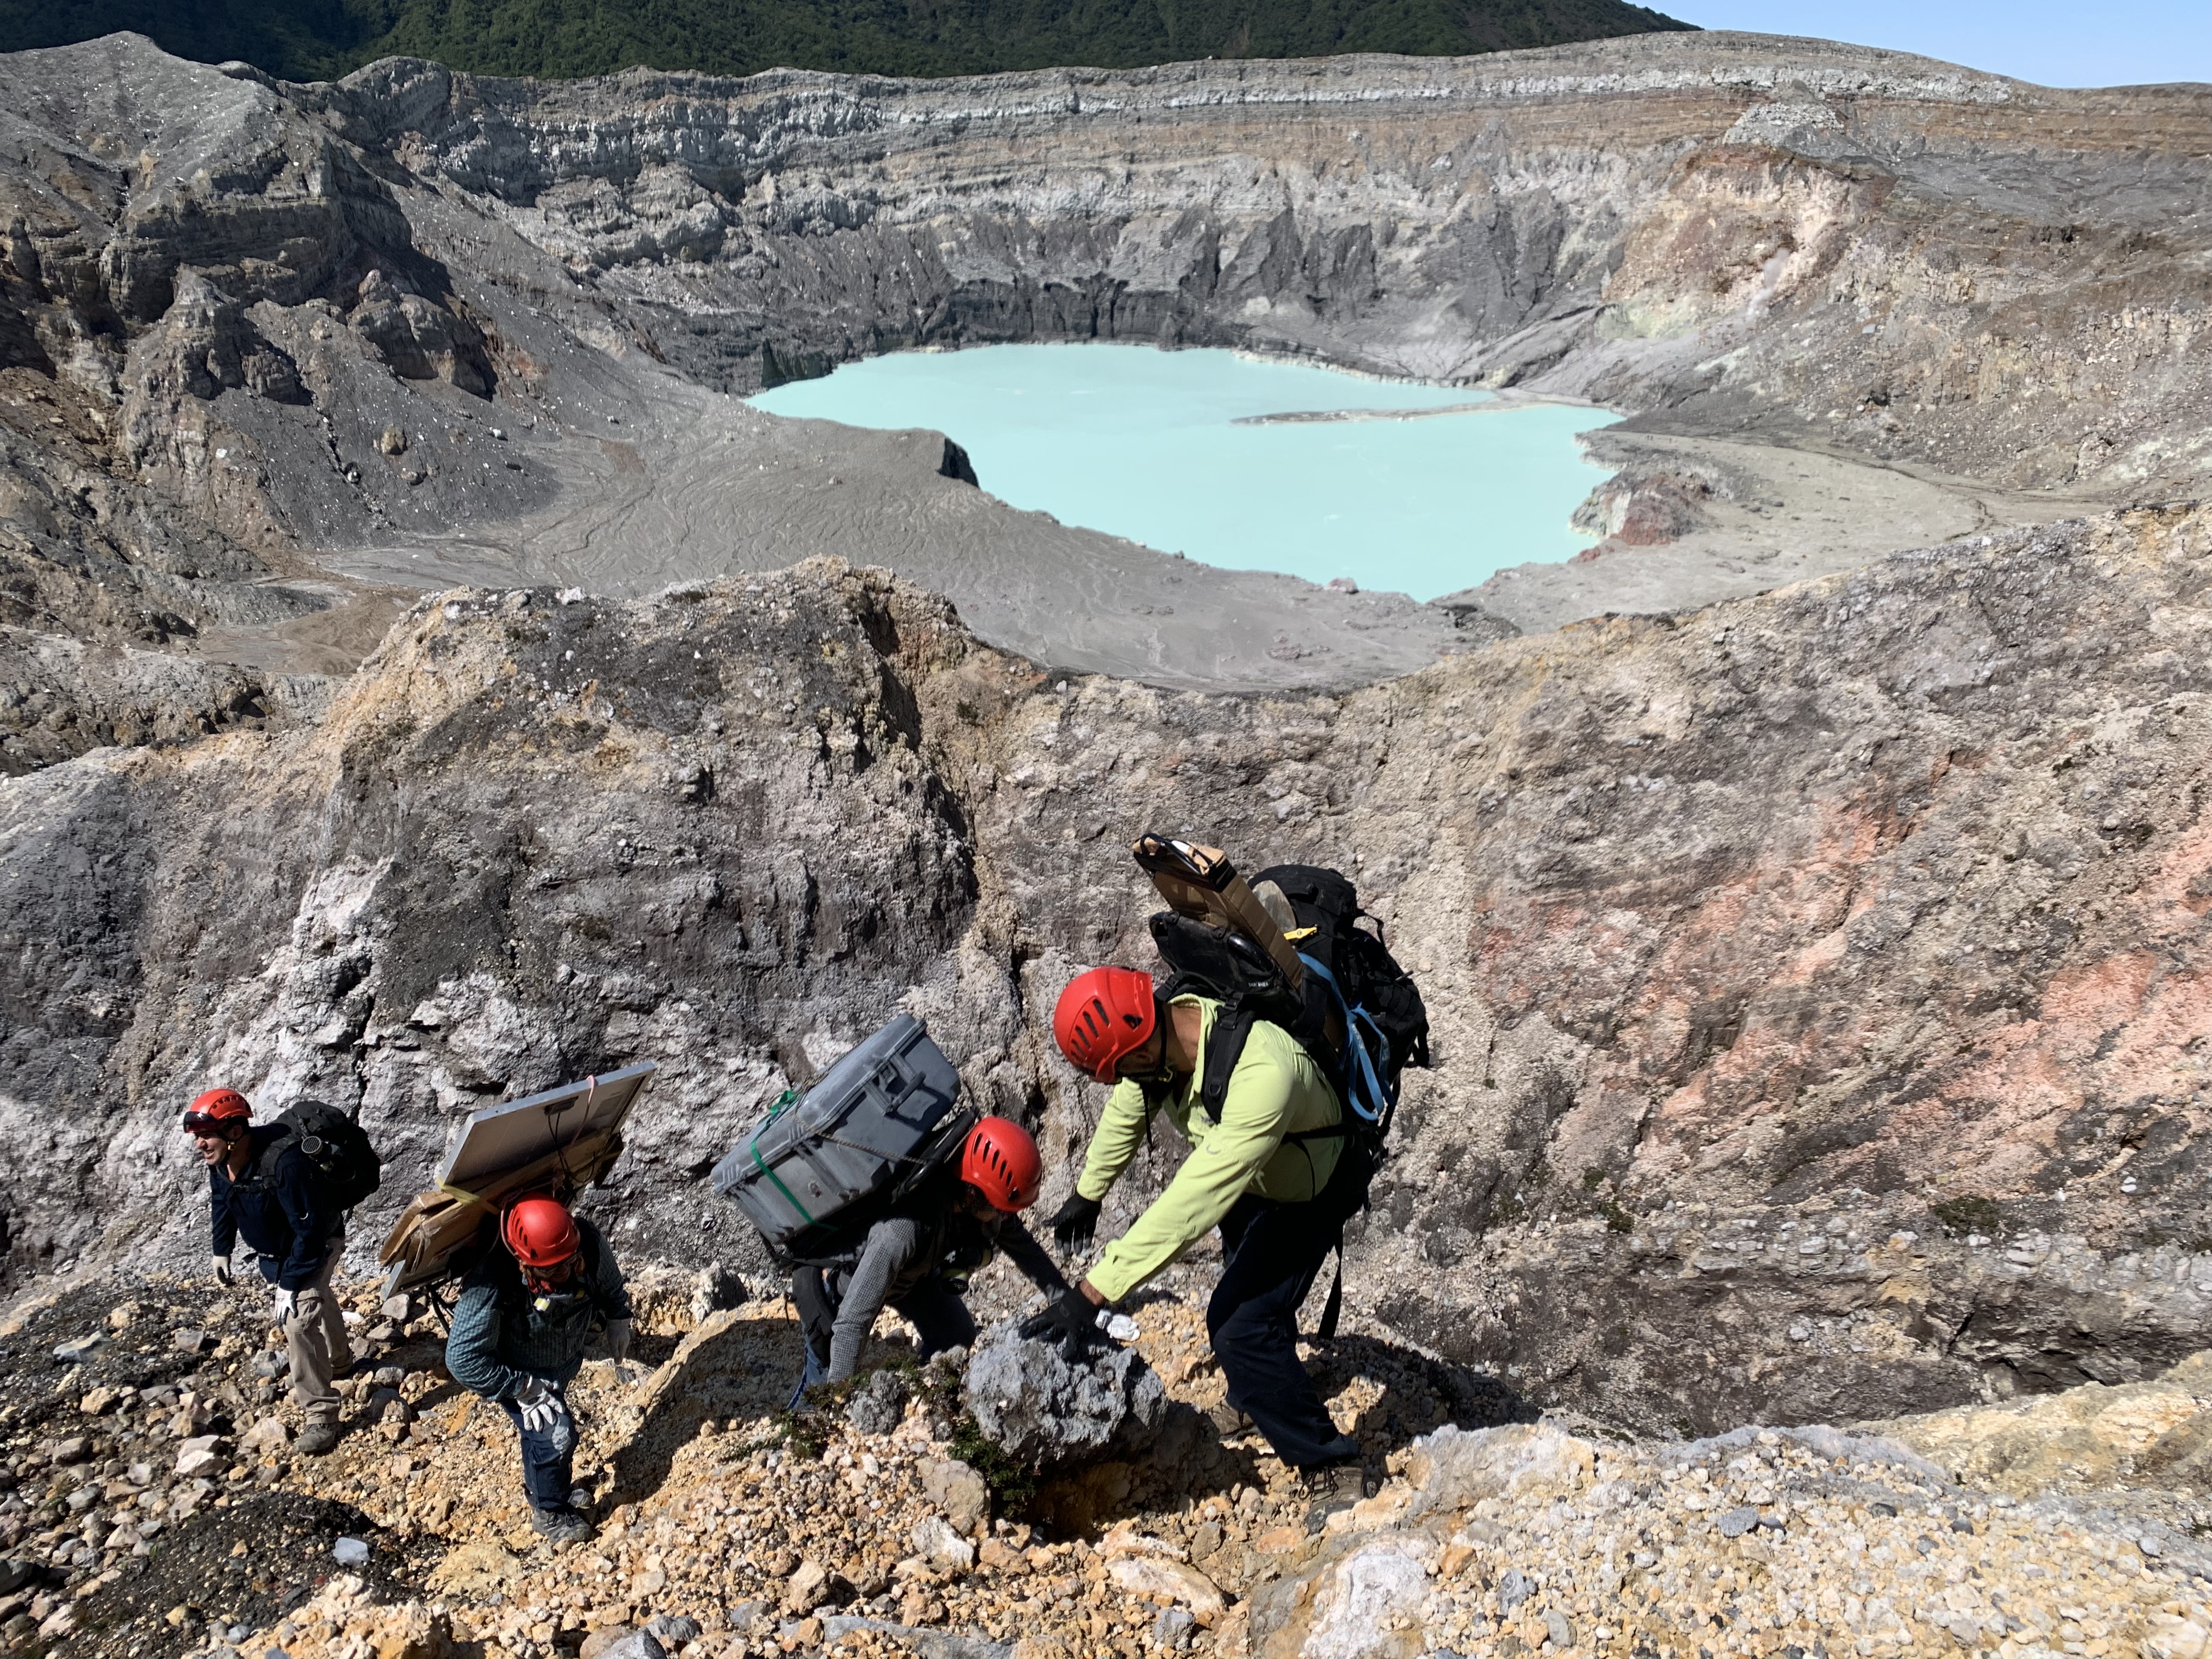 Researchers working in the crater region are seen carrying equipment for a scientific instrument deployment. Credit: OVSICORI.